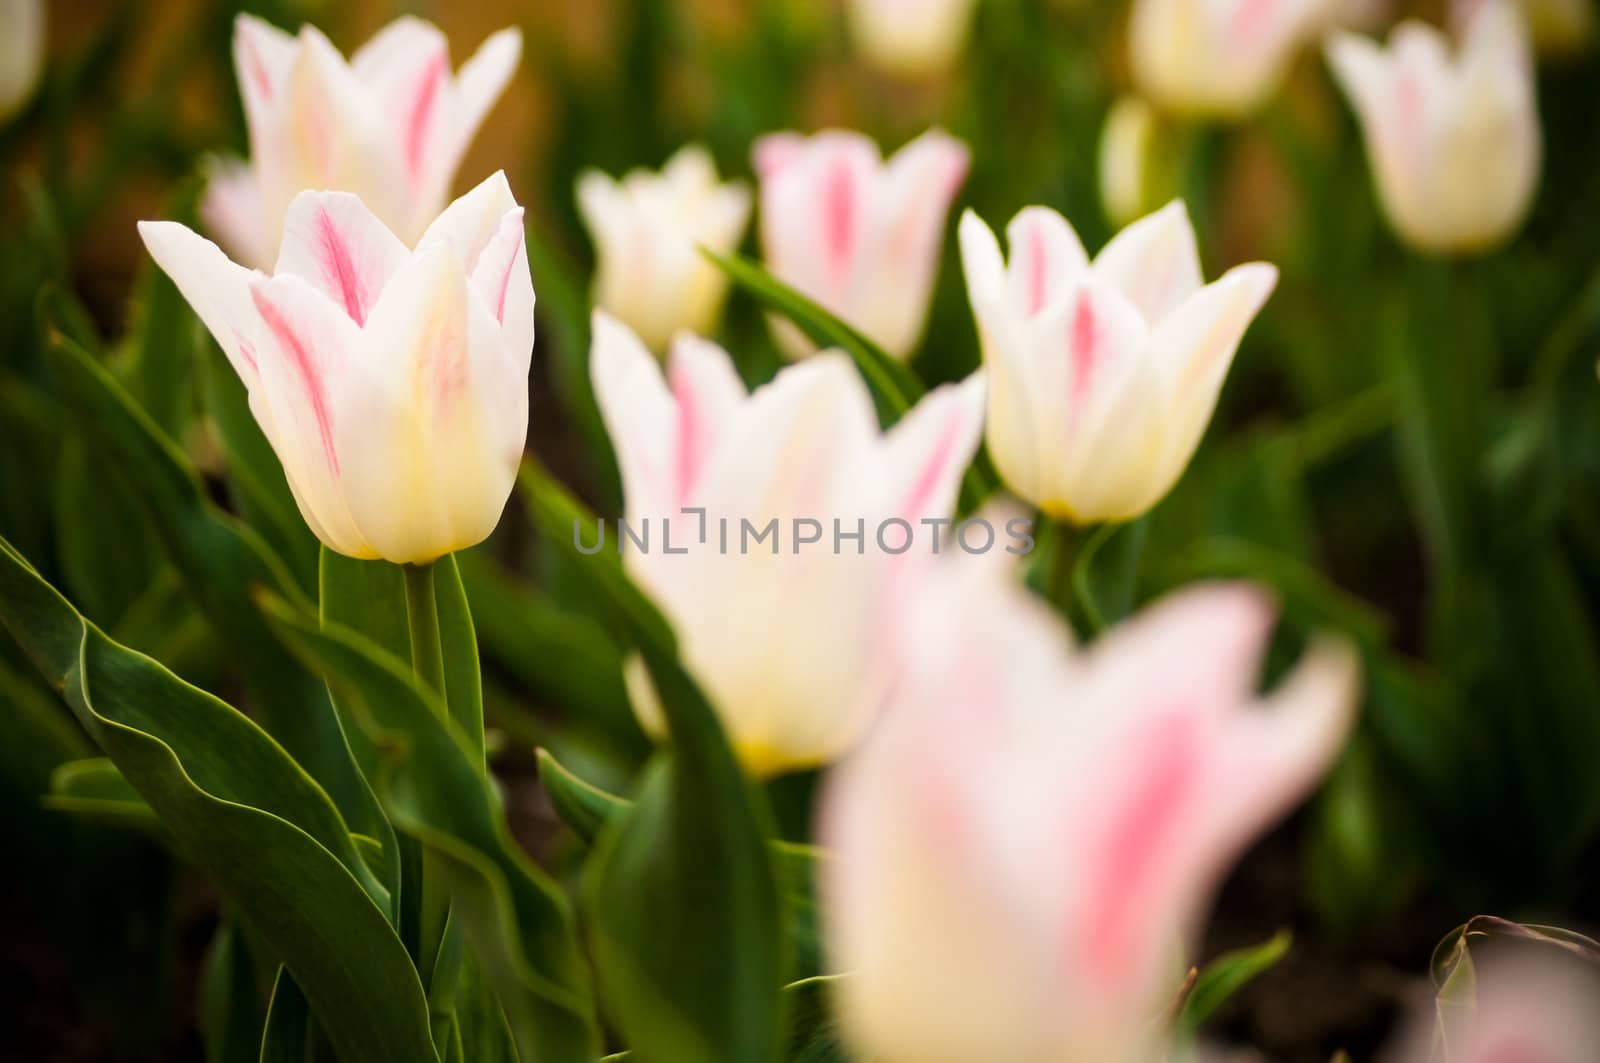 Bright tulips in a city park by Viktoha